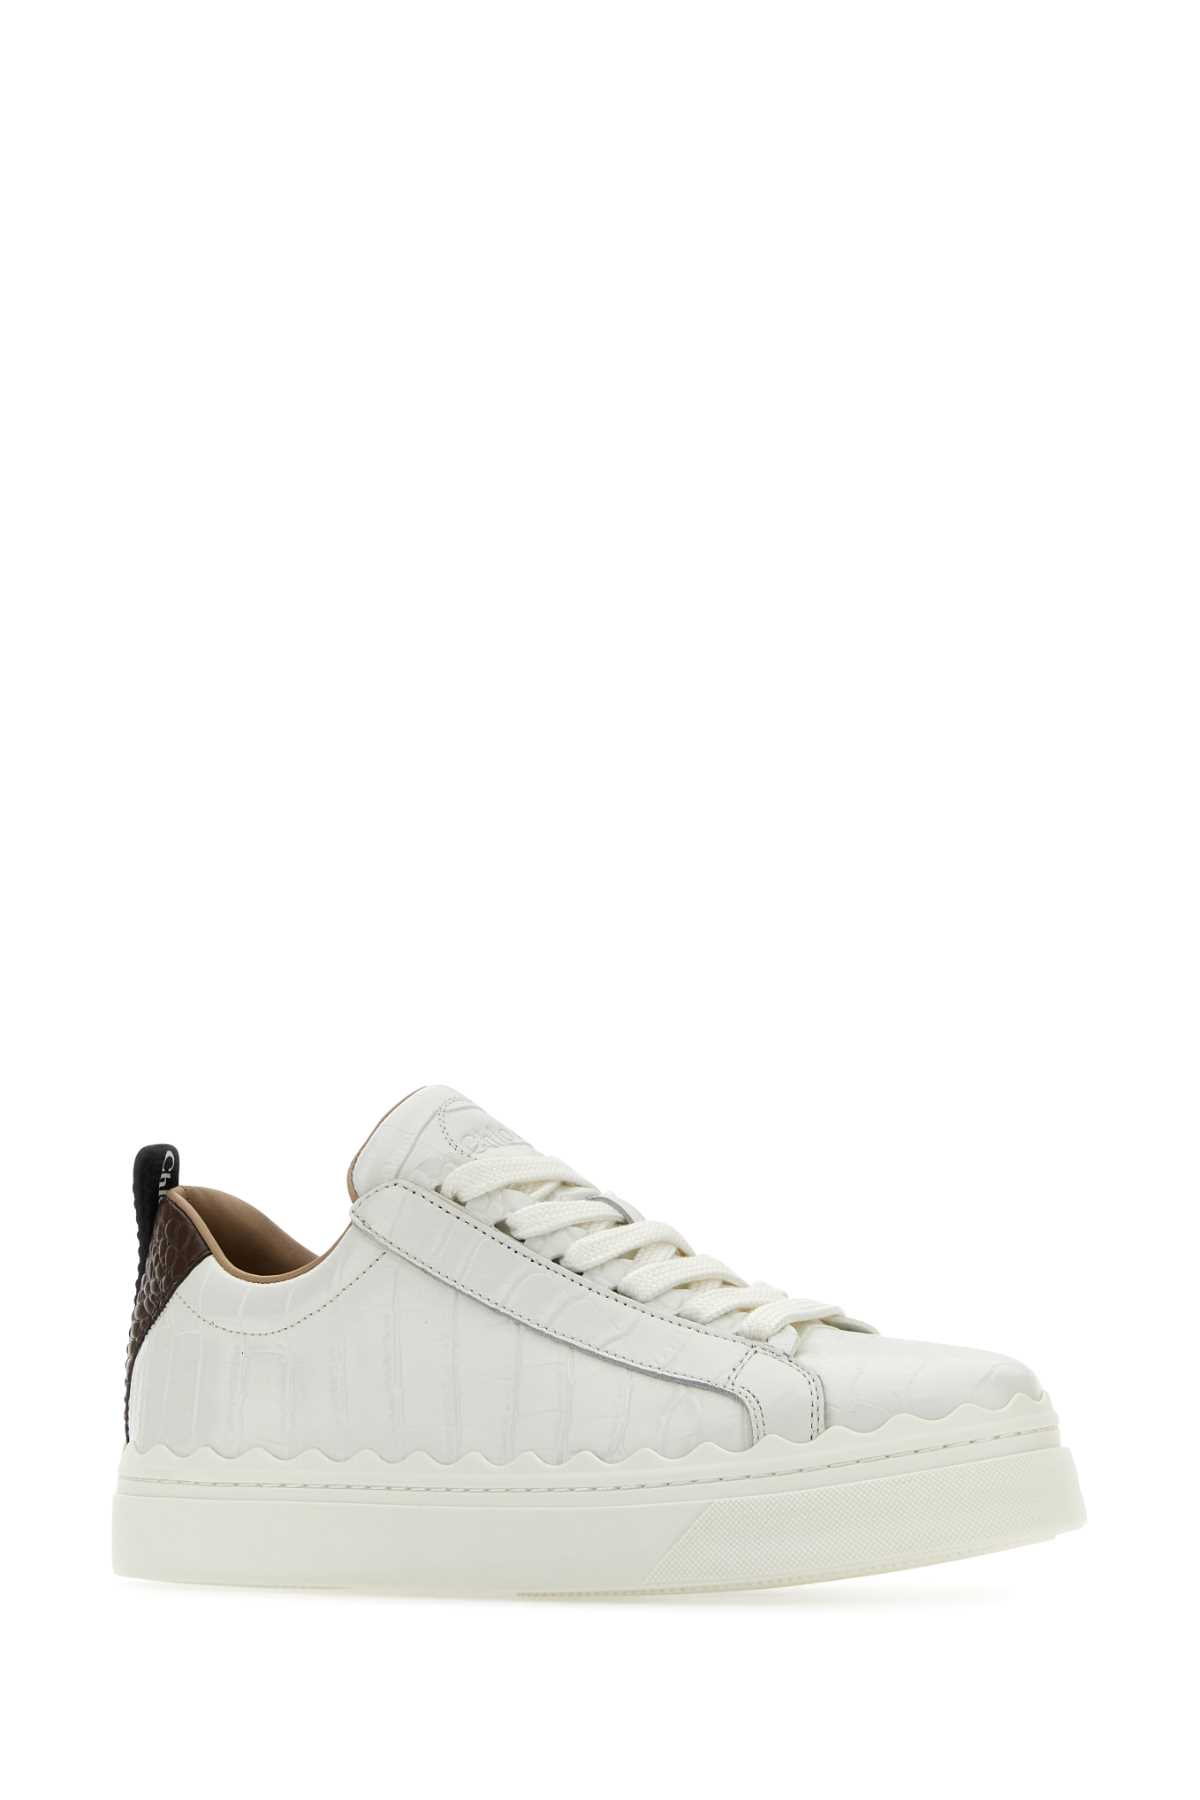 Chloé White Leather Sneakers In Whitebrown1